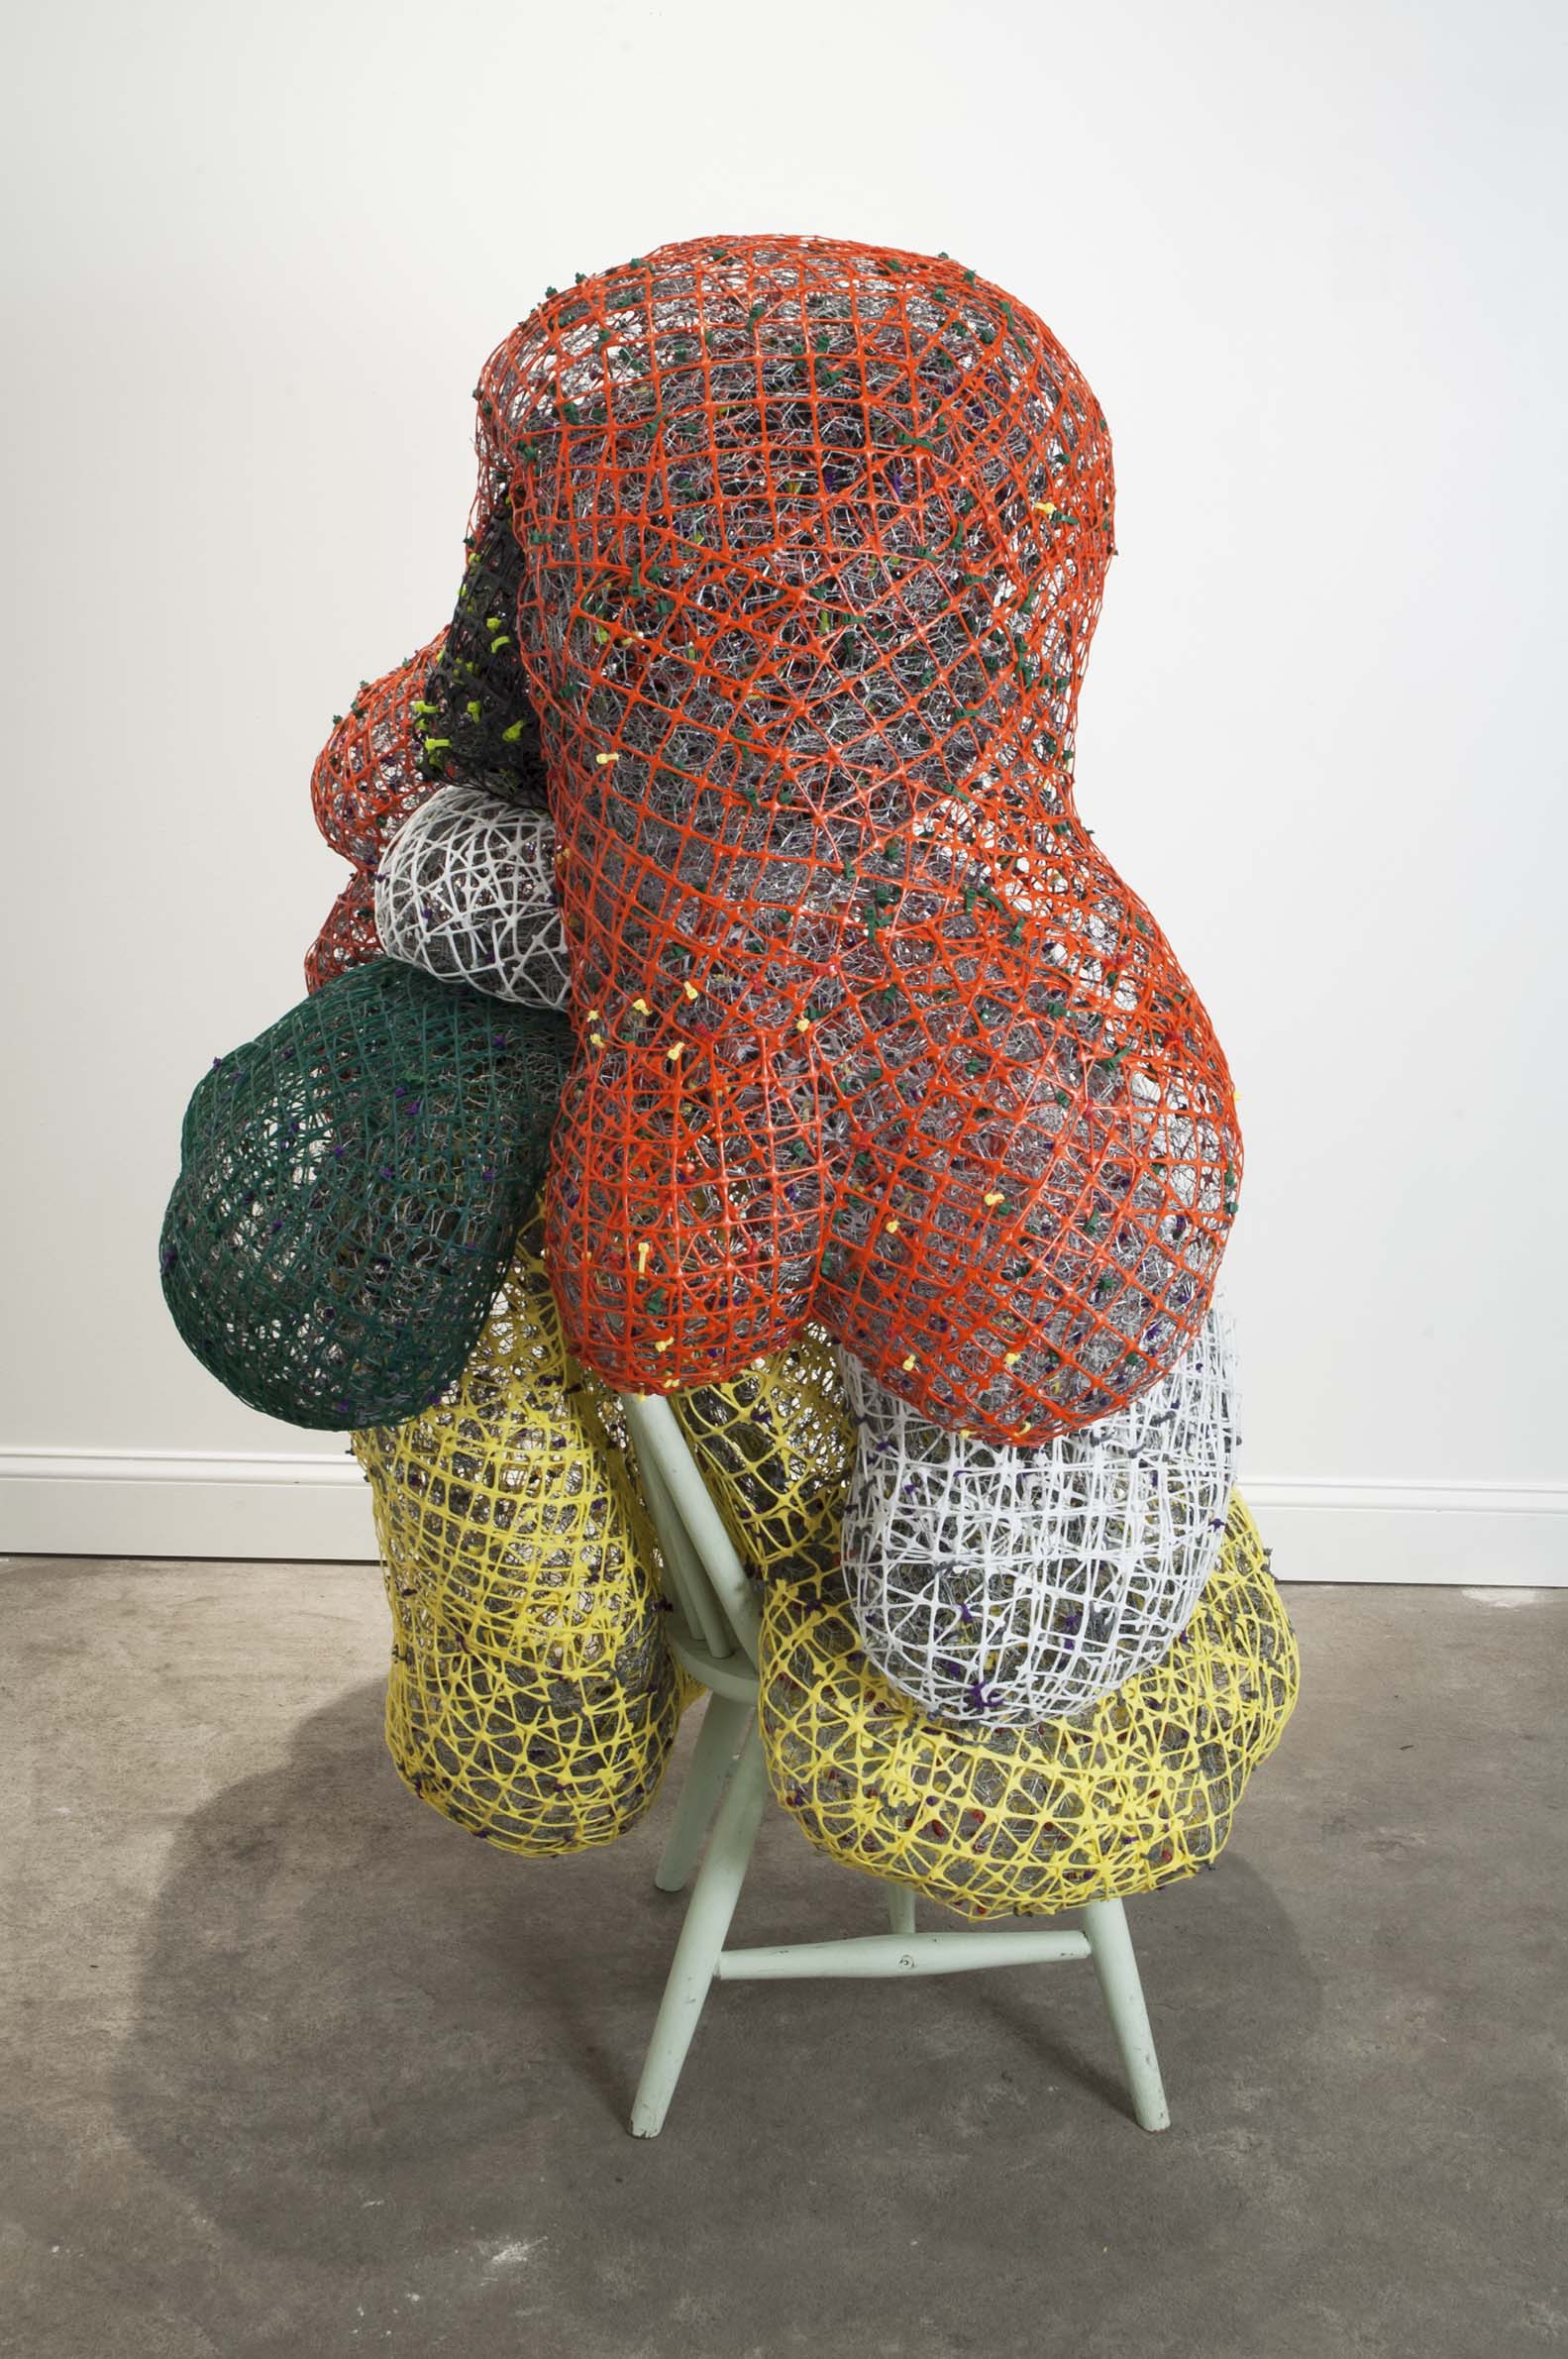   Dirty Laundry   plastic+metal fencing, chair  69" x 39" x 43"  2015 